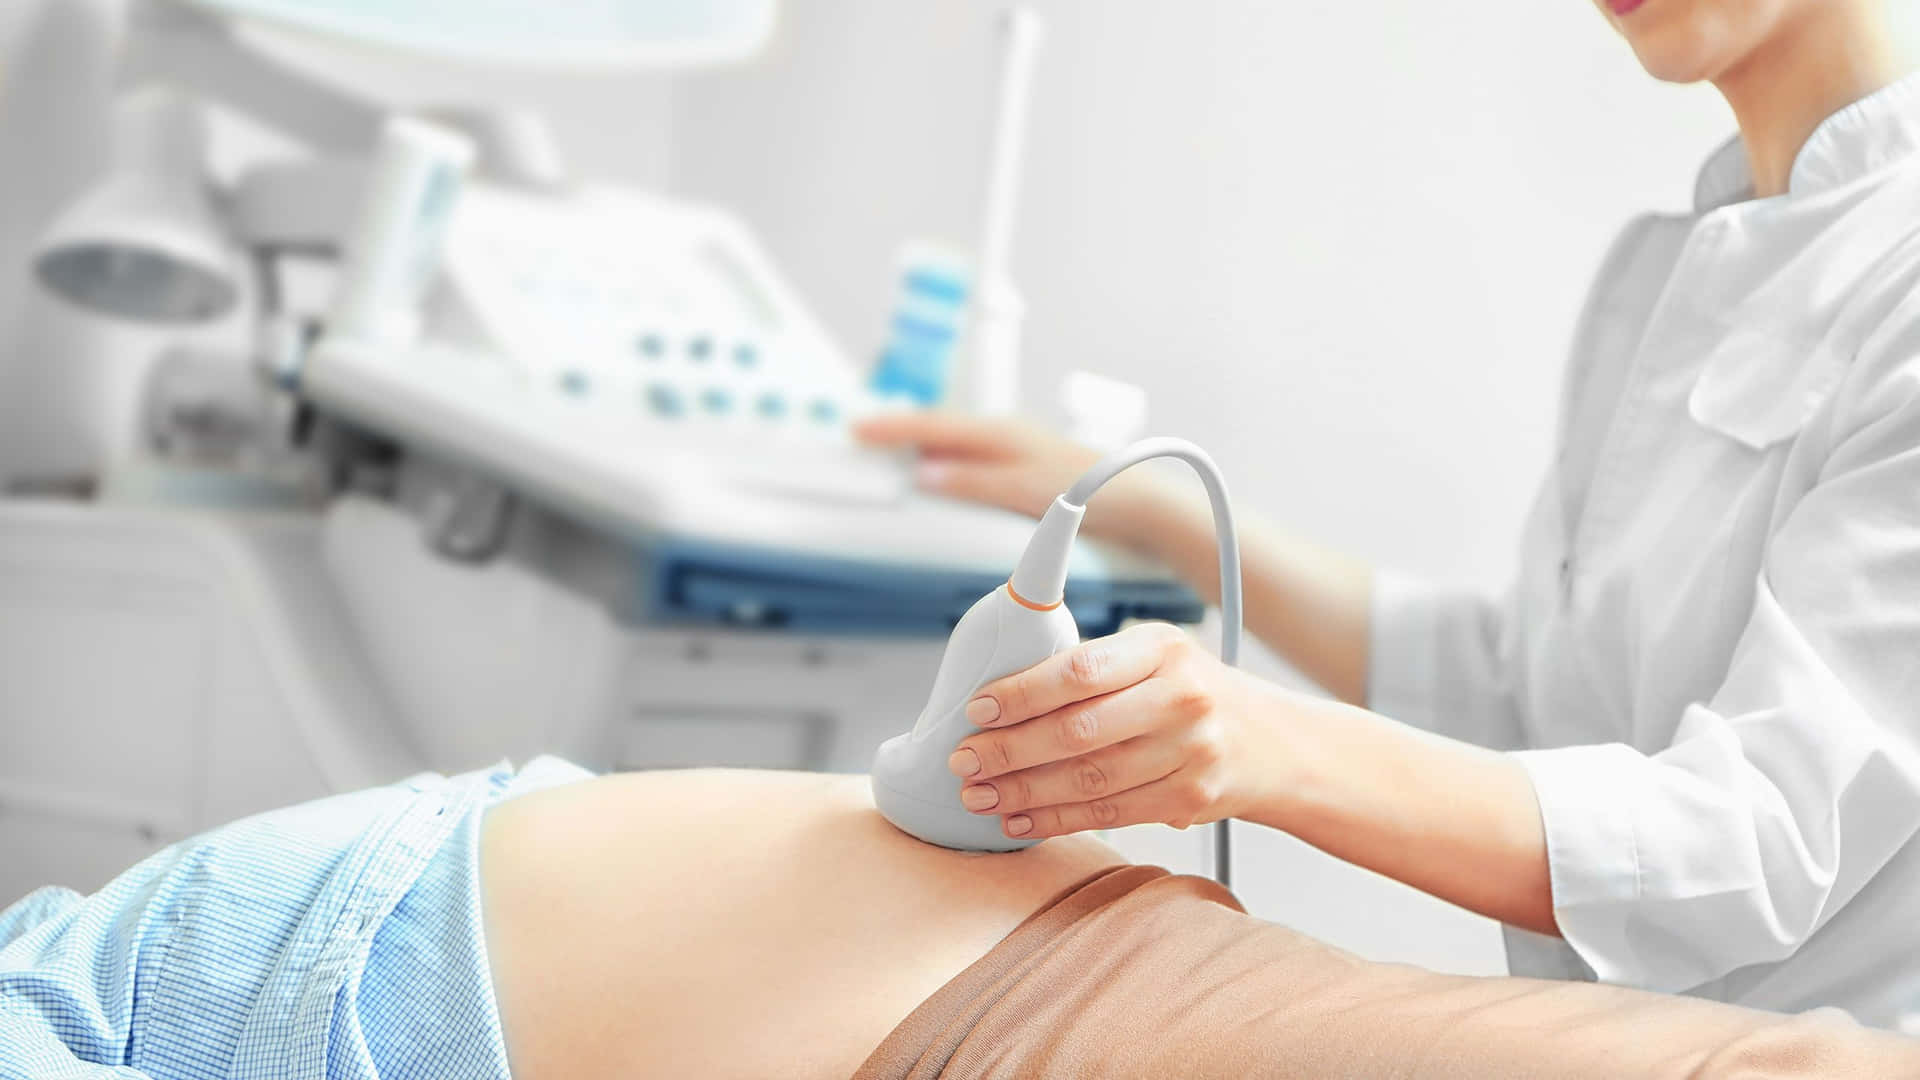 A Woman Is Being Examined By An Ultrasound Machine